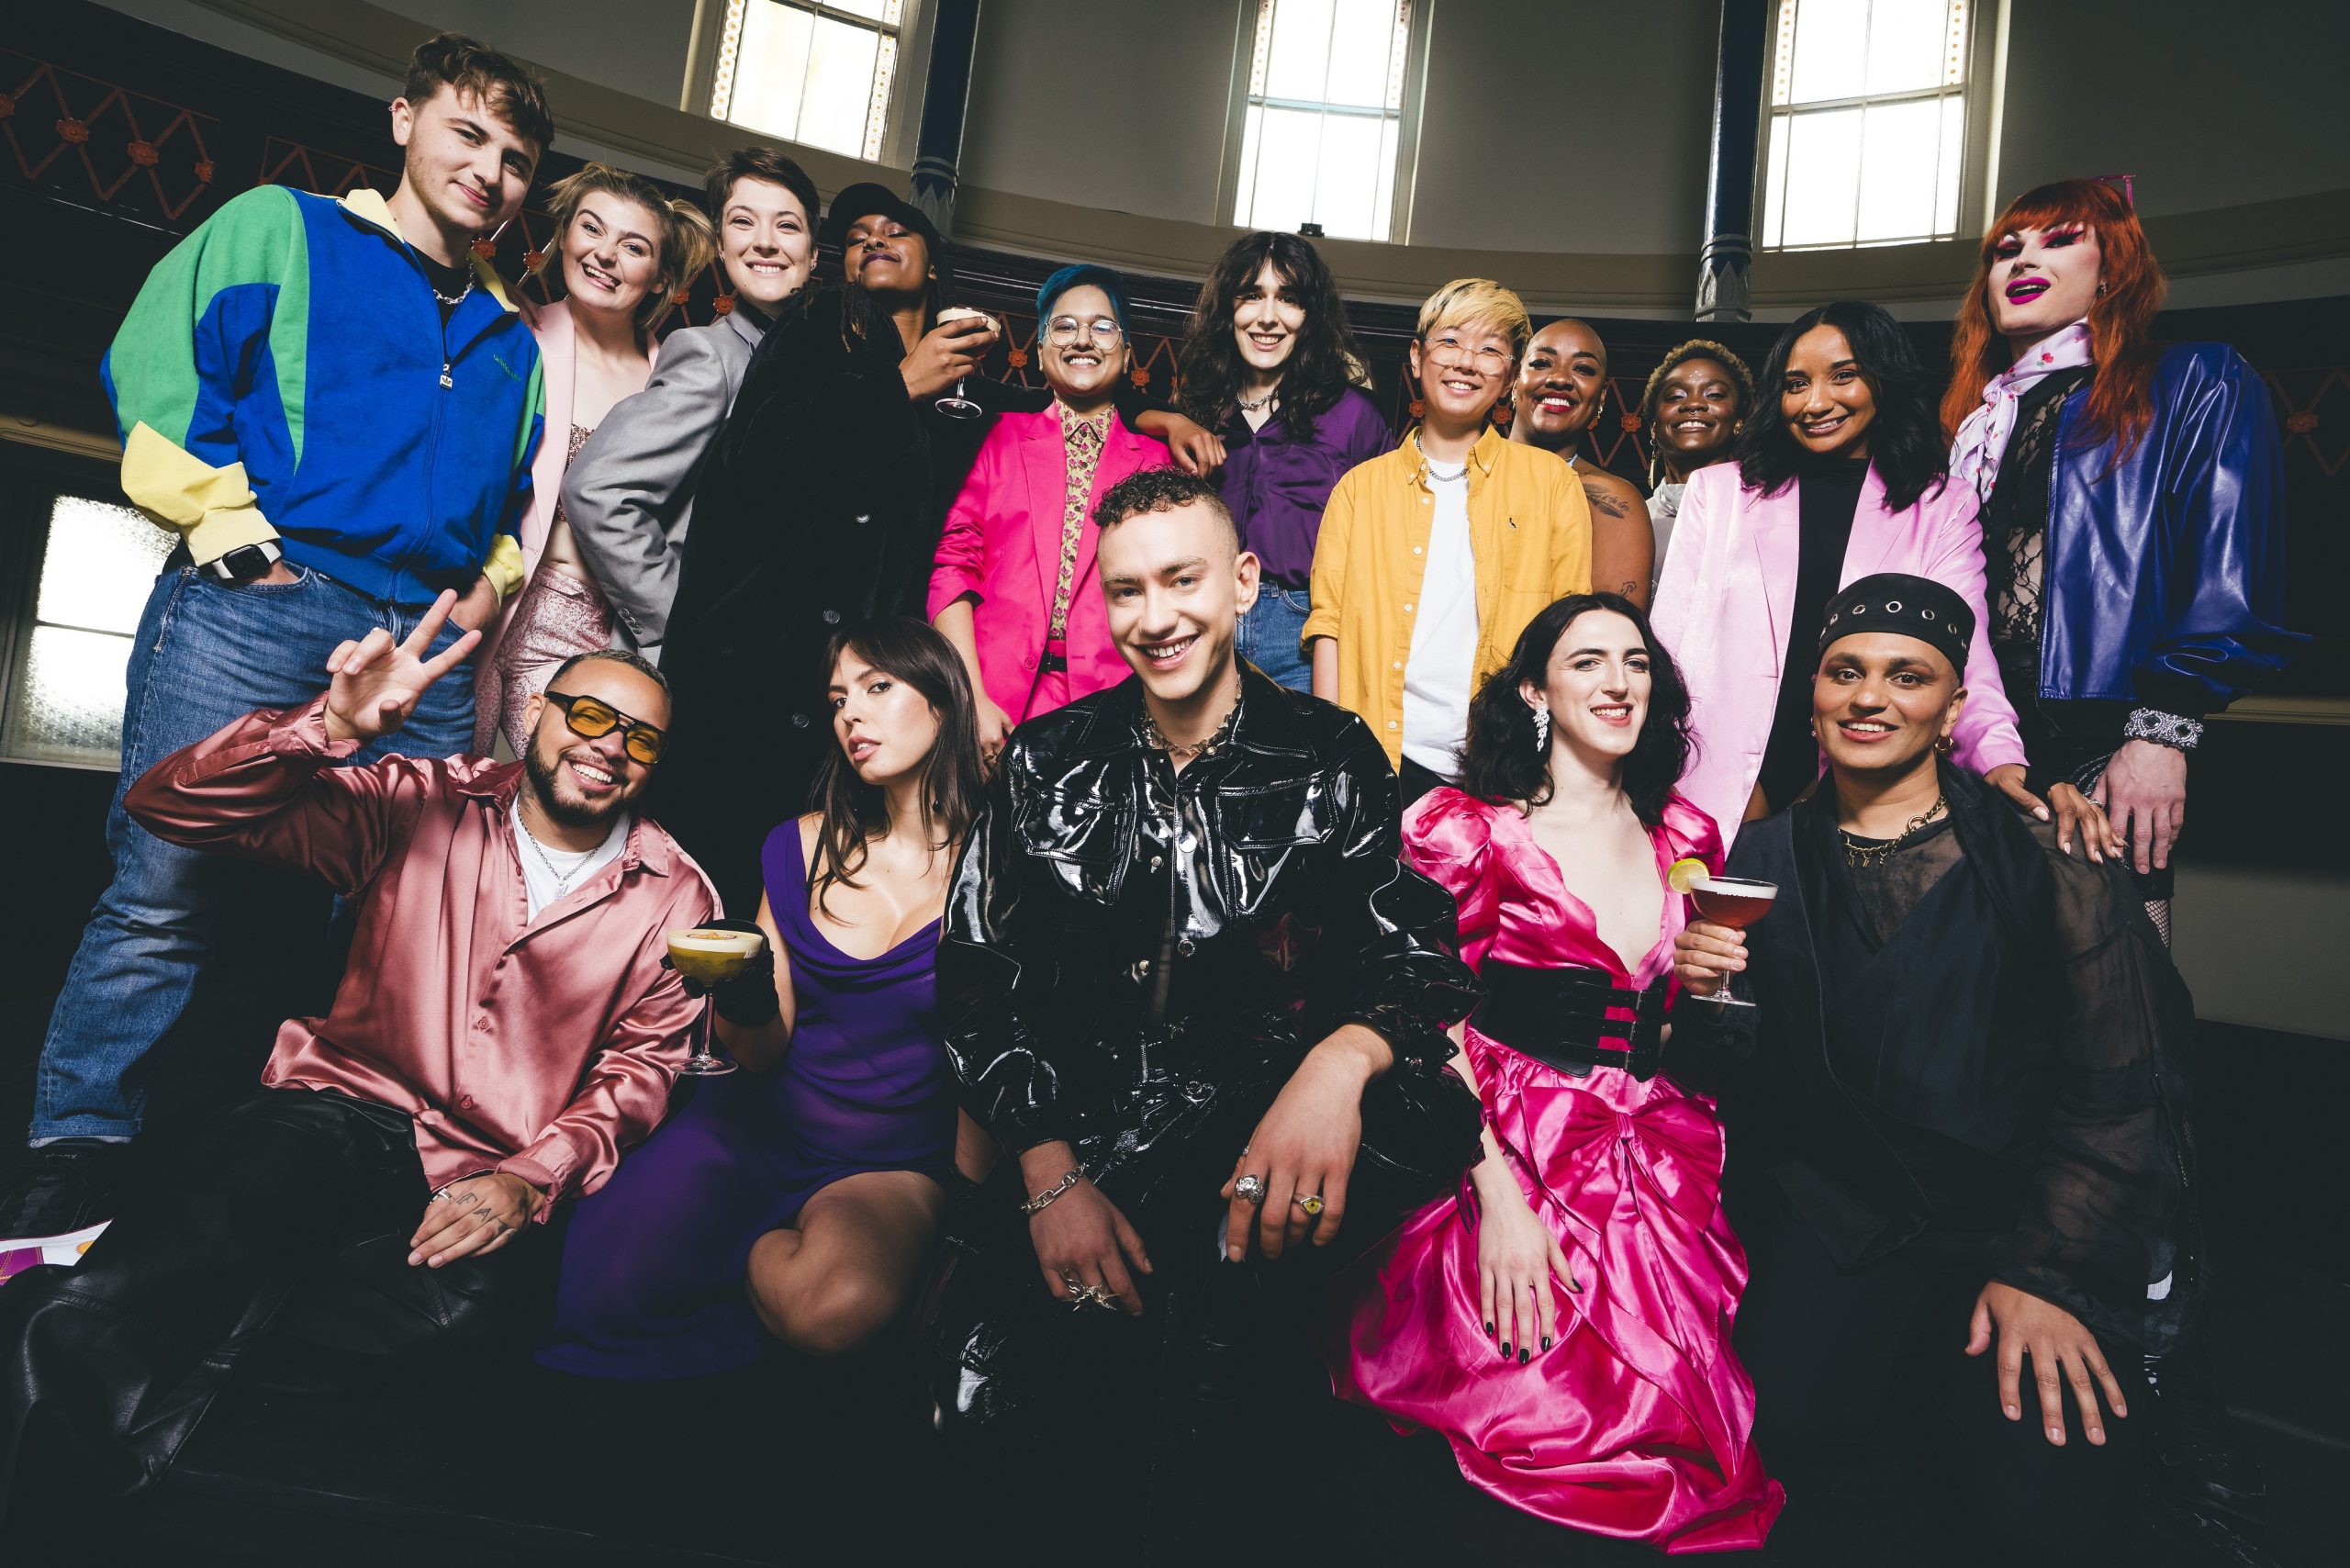 Introducing ‘The Absolut Choir’, led by music icon Olly Alexander